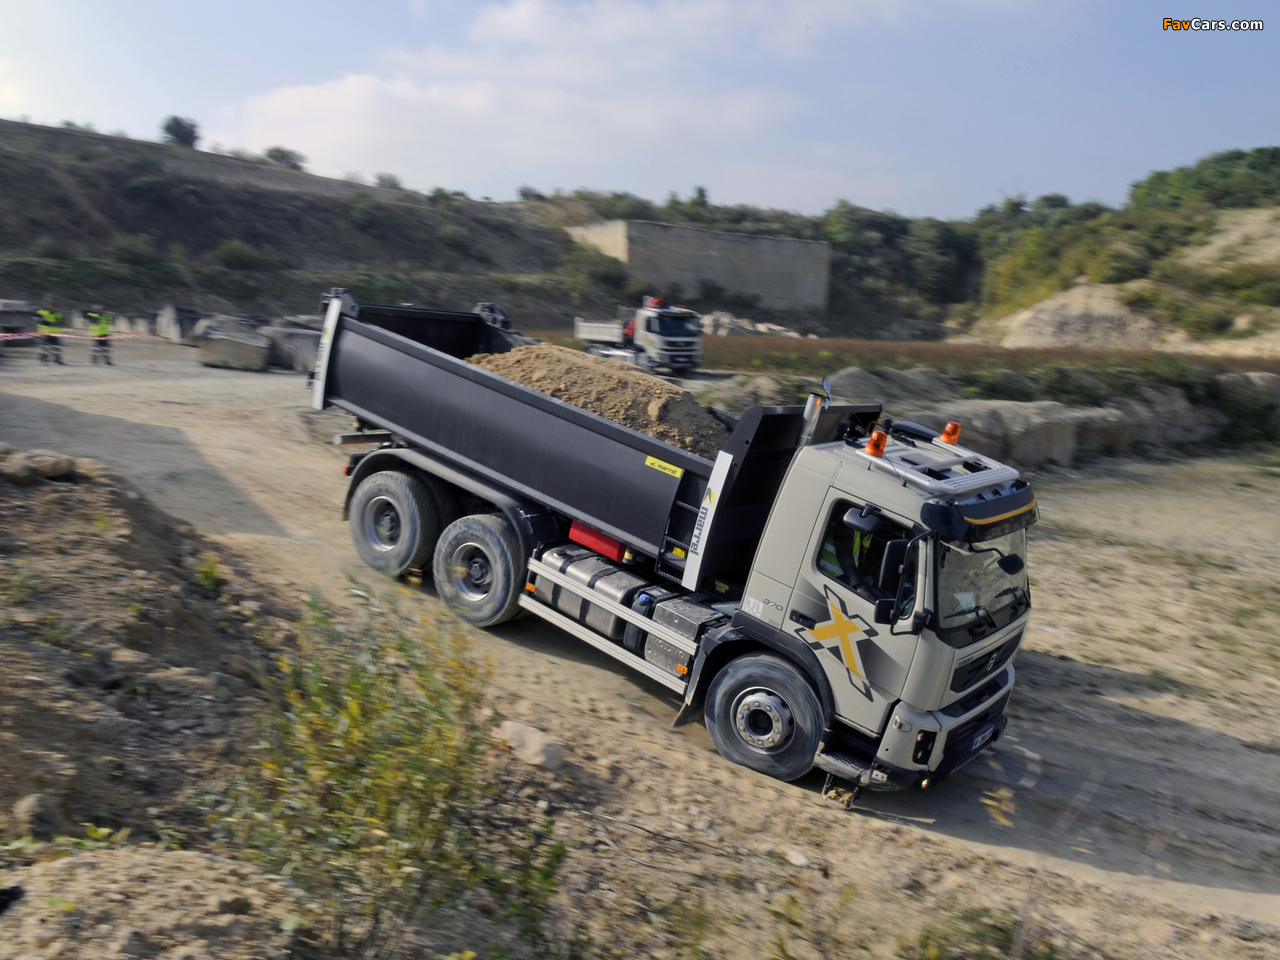 Volvo FMX 6x4 2010 pictures (1280 x 960)